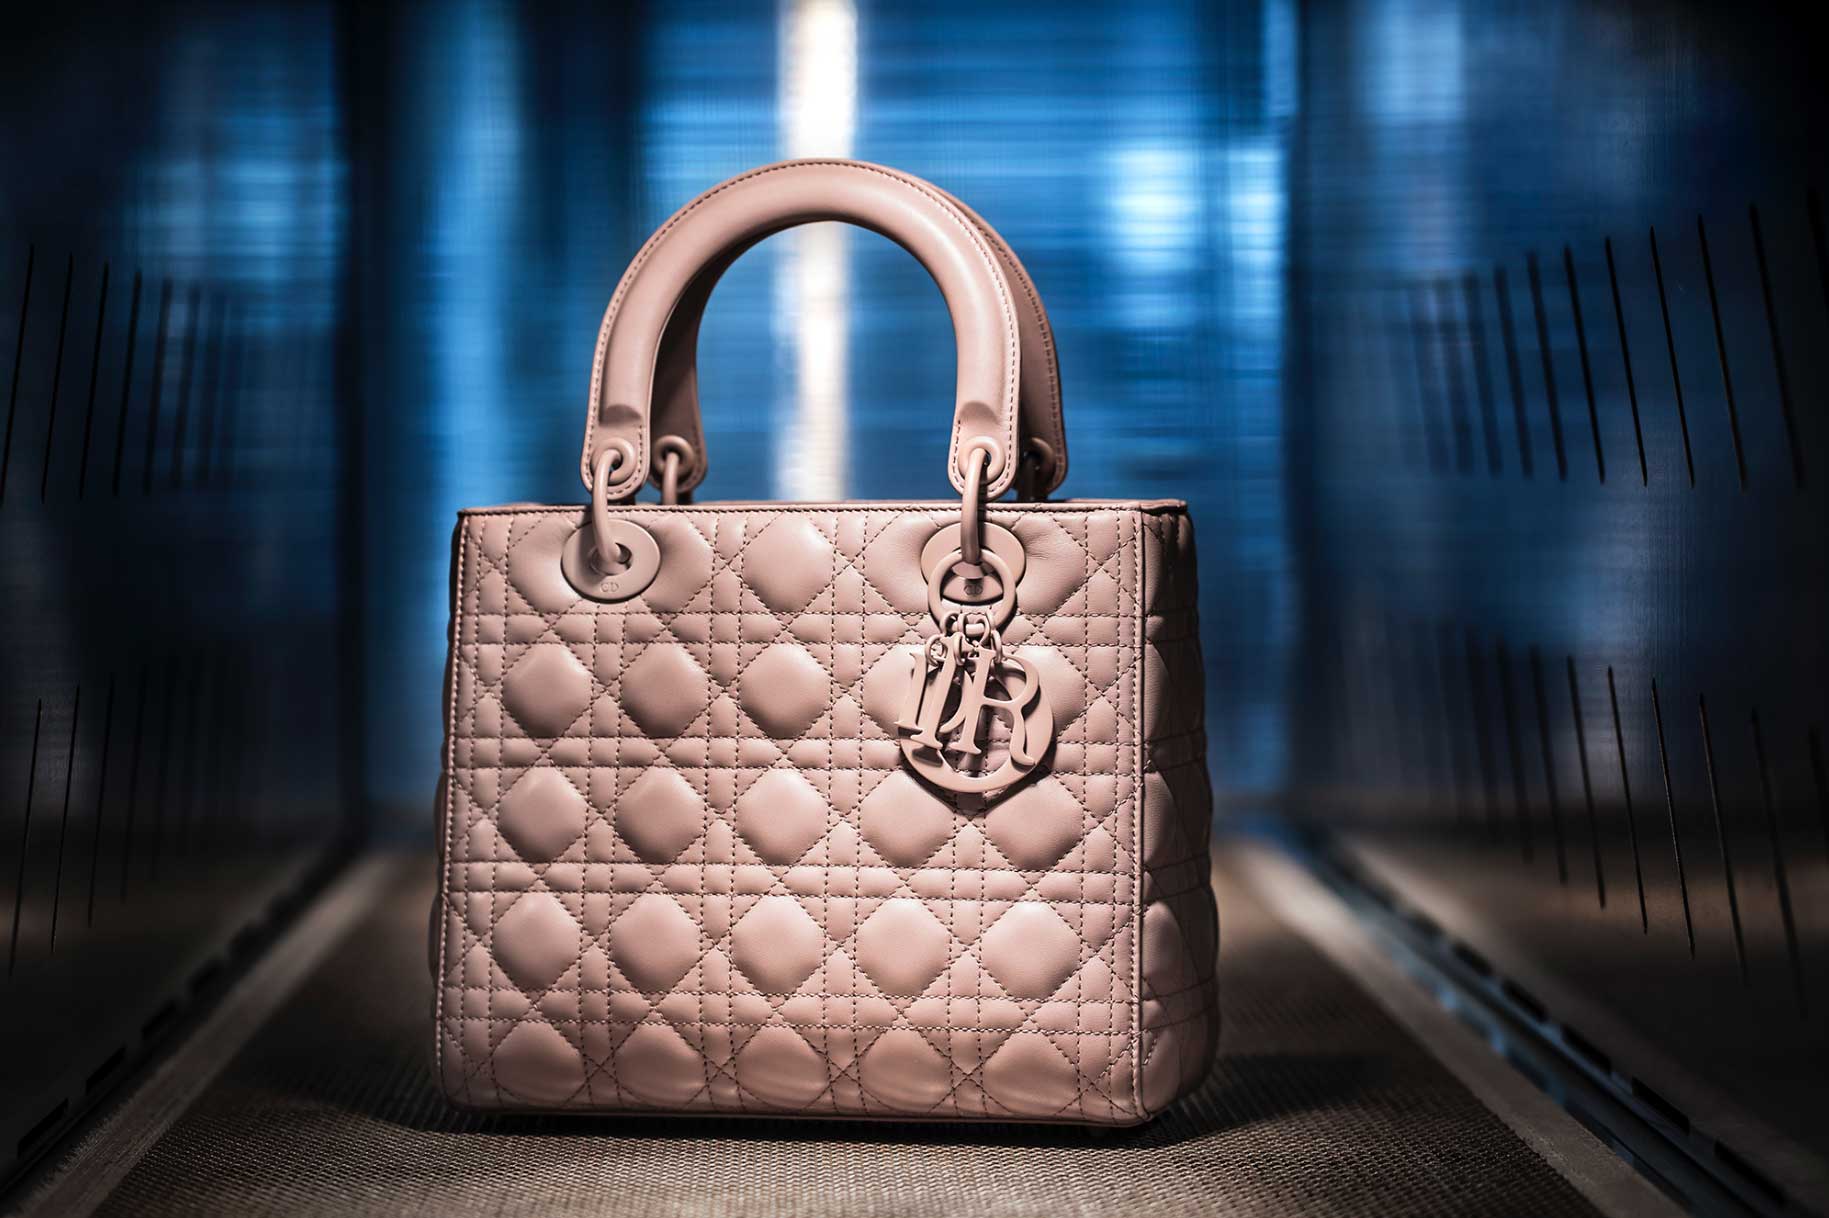 Exclusive: watch the making of the new Dior handbag